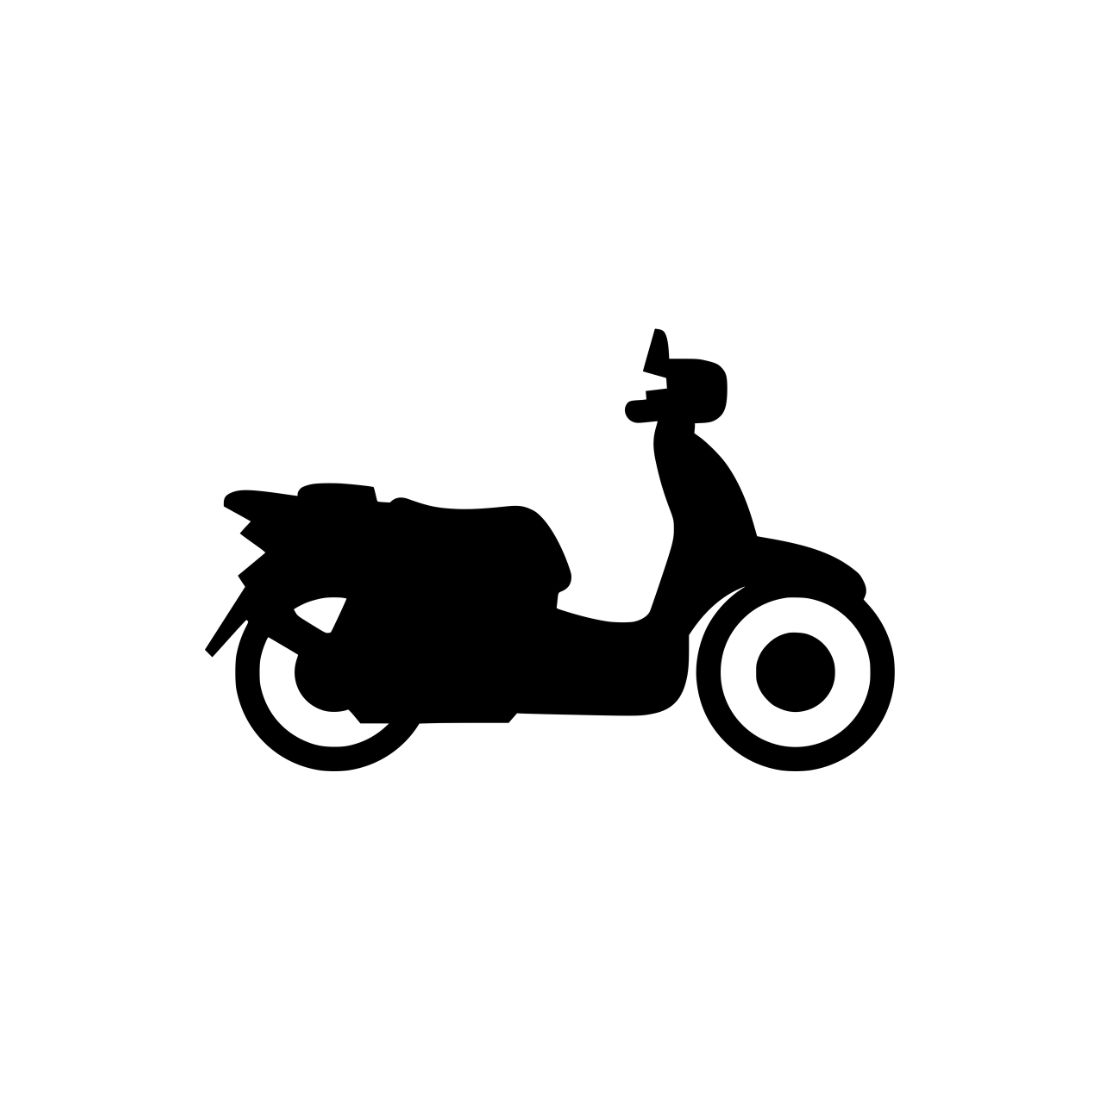 Motorcycle Silhouette Bundle Preview image.